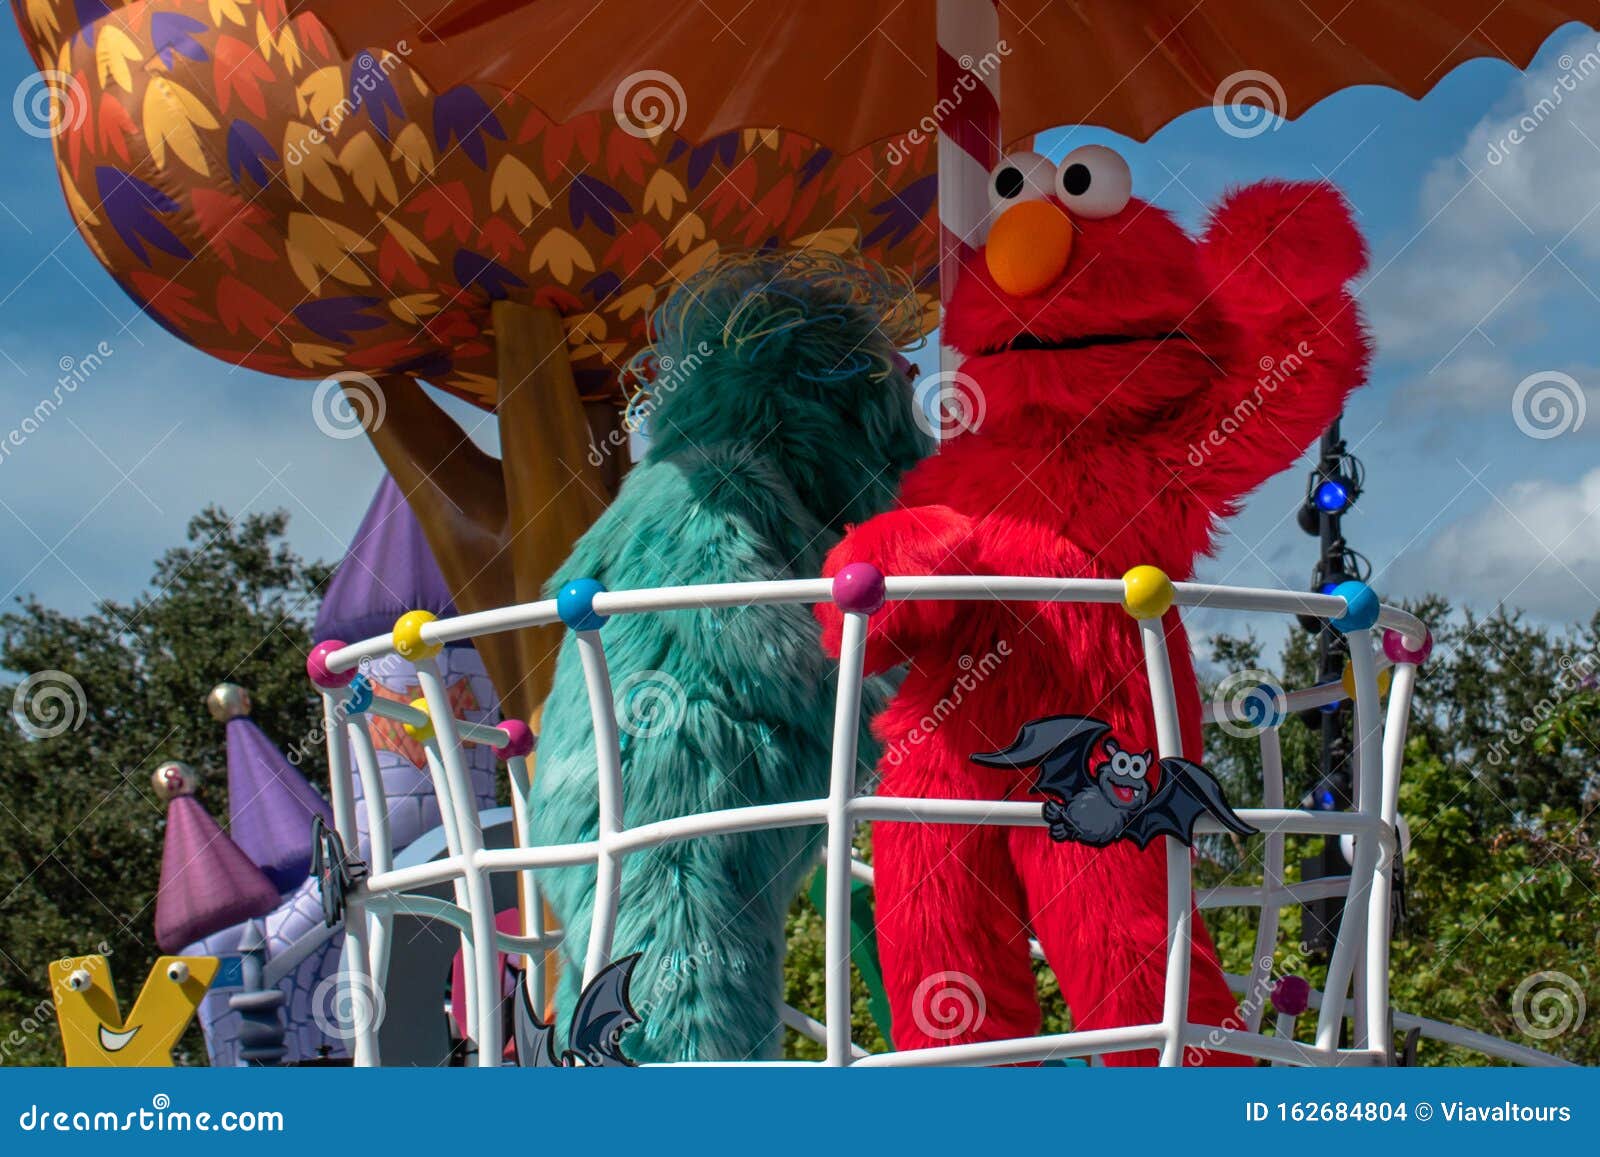 Elmo and Rosita in Street Party Parade at Seaworld 5 Editorial Stock Image - Image of enjoyment, event: 162684804